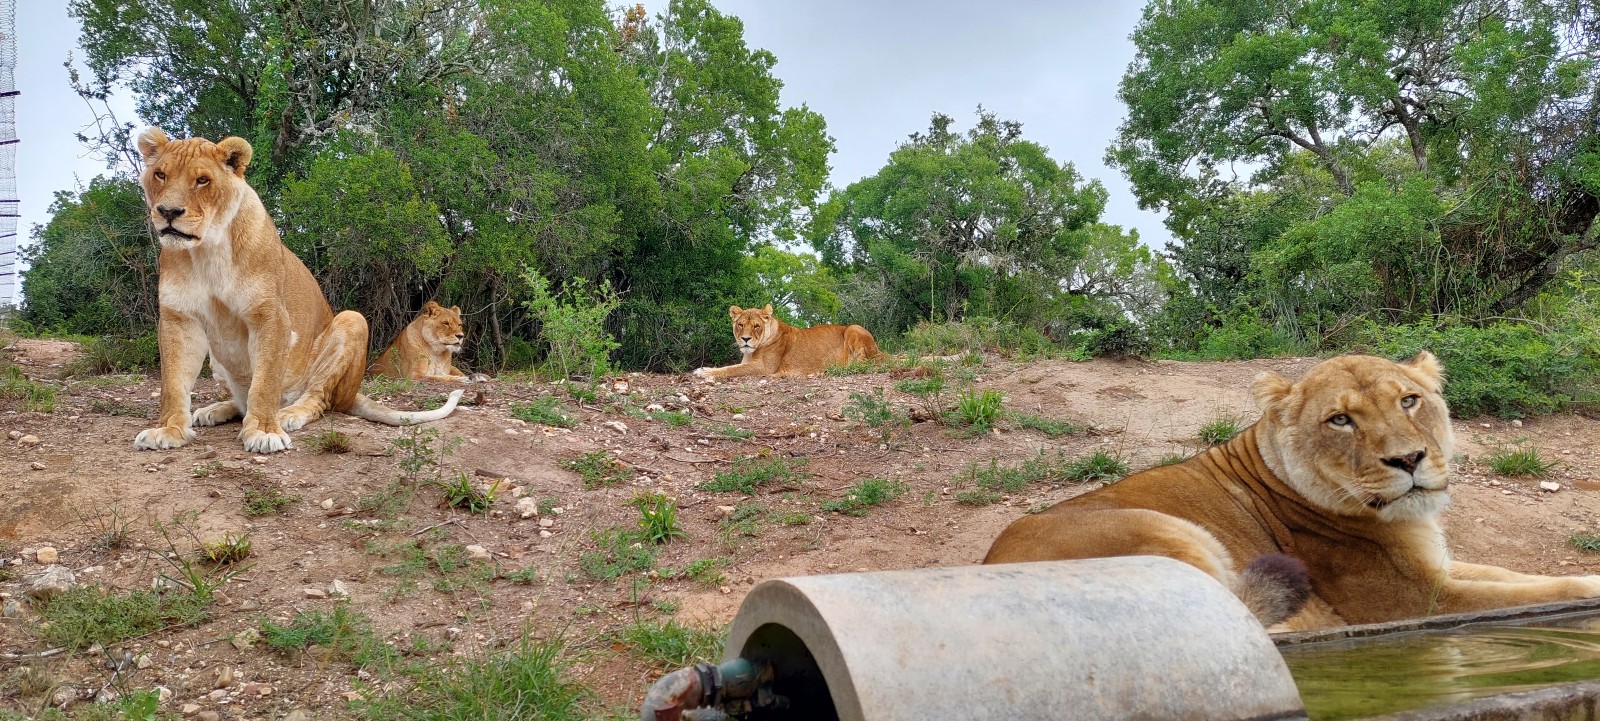 A landscape photo showing four lions relaxing in a large enclosure